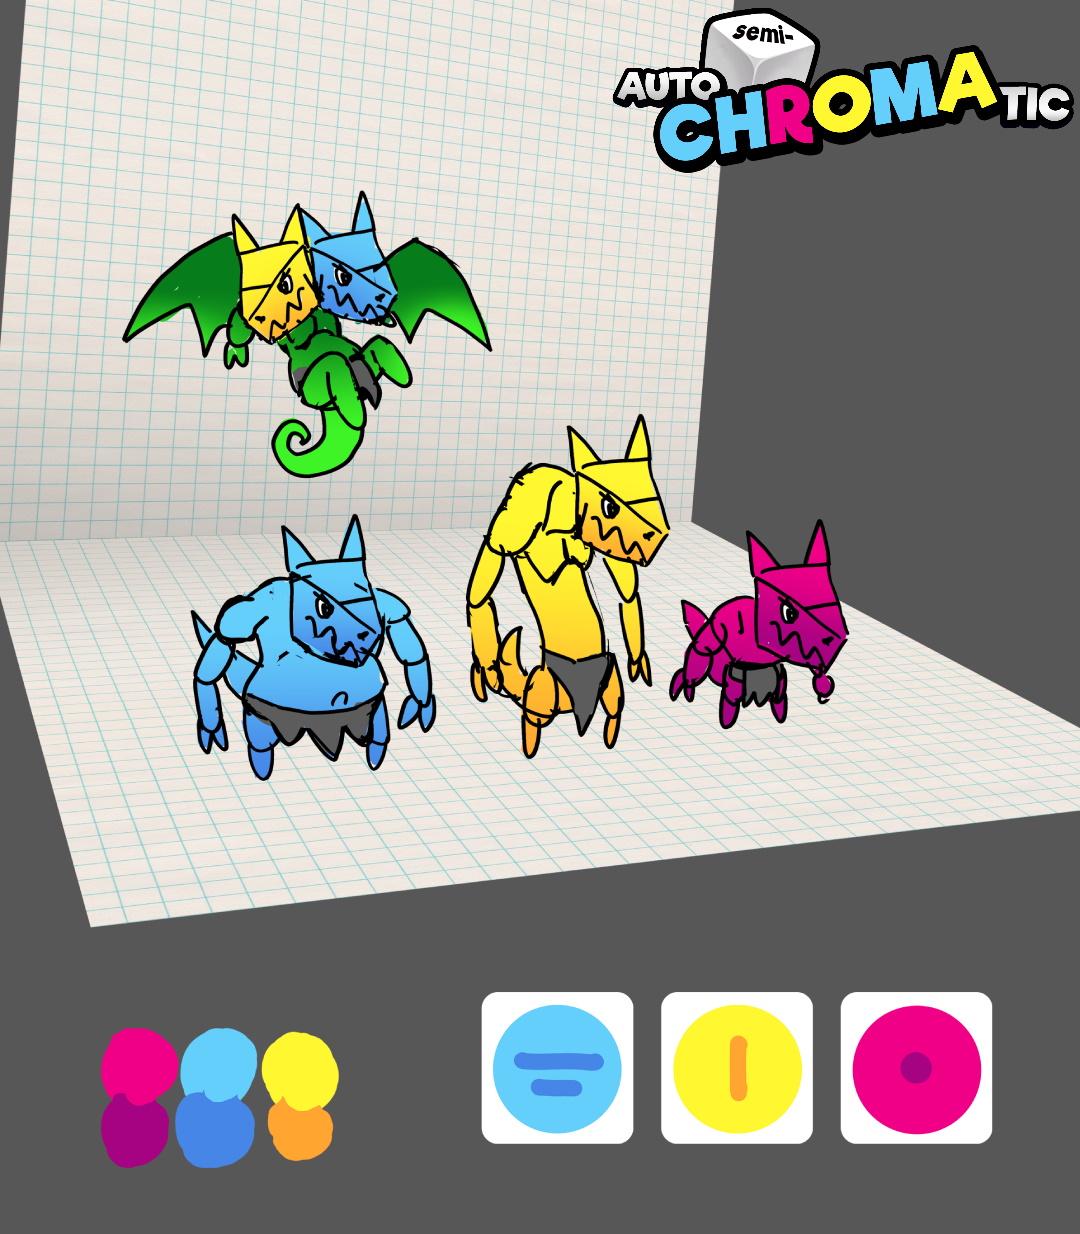 Concept art showing ideas for the cyan enemy, yellow enemy, magenta enemy, and a combined cyan/yellow enemy with a two heads and a green body. Ideas for the faces of the dice can be seen, with the cyan die having two horizontal lines, the yellow die having a single vertical line, and the magenta die having a circle. The game logo can be seen in the top right.